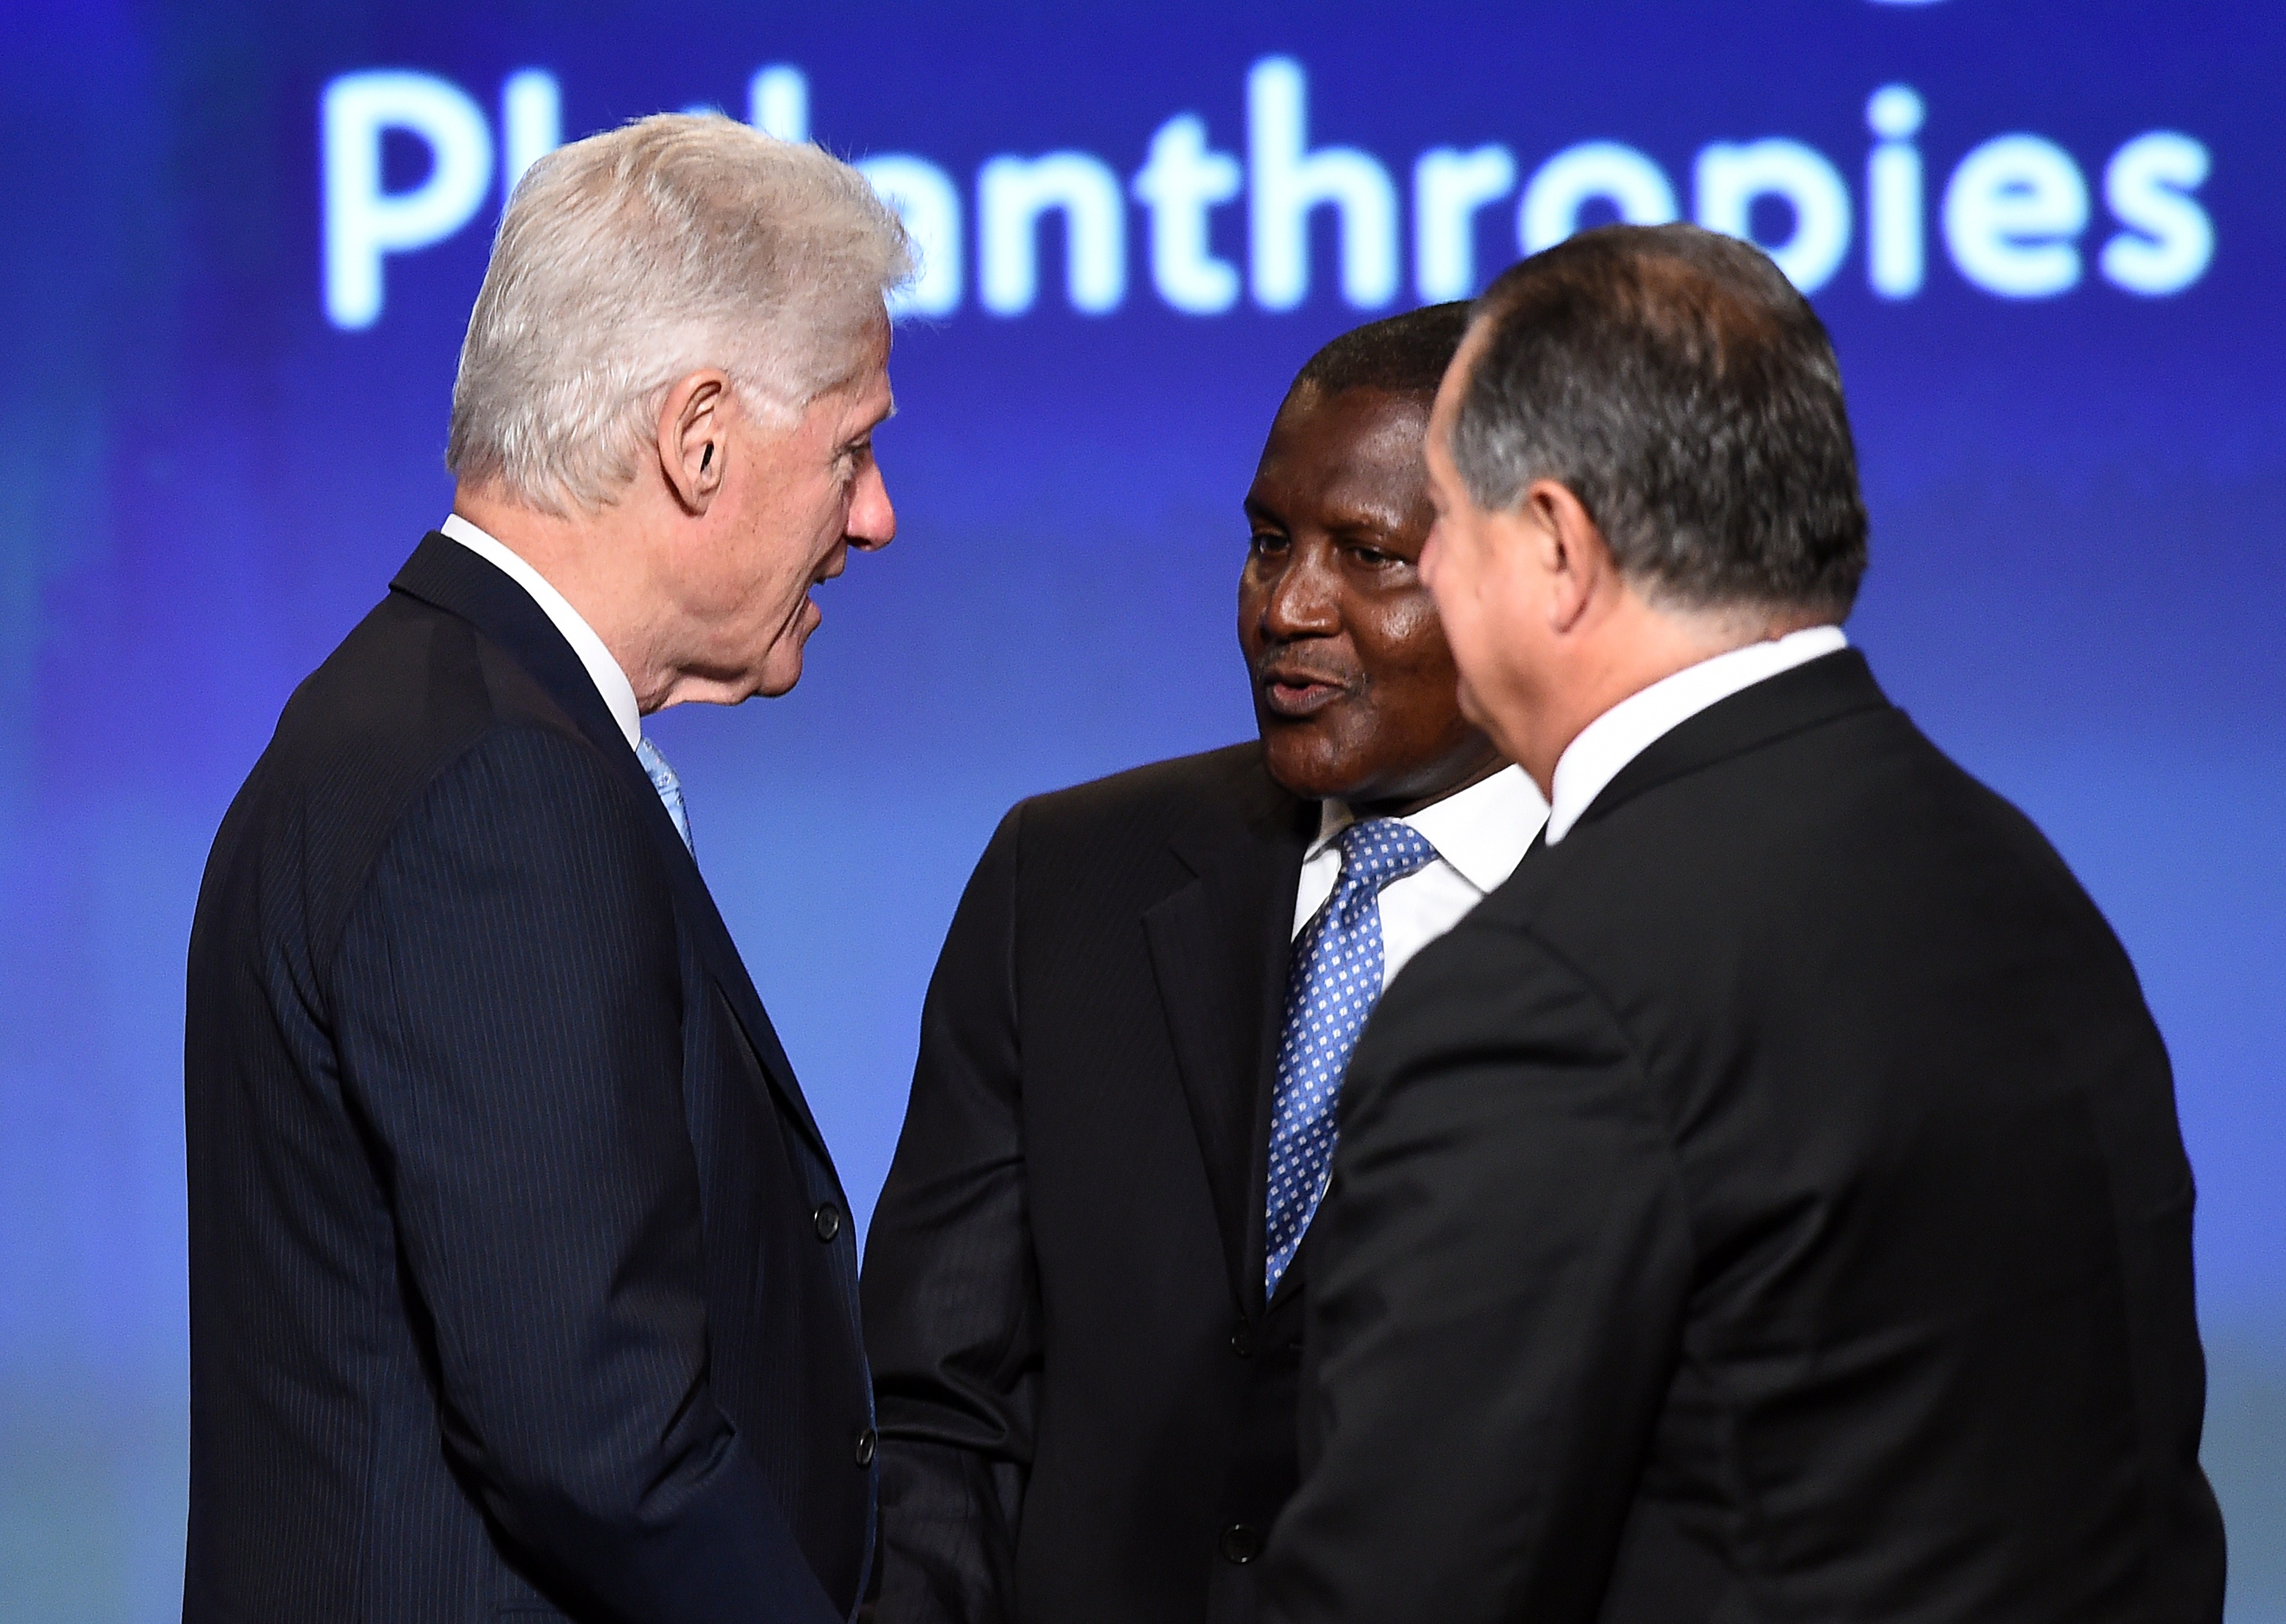 Former U.S. President Bill Clinton (L) speaks with Aliko Dangote (C), President and CEO, Dangote Group, and Andrew N. Liveris, President, Chairman & CEO, at the end of a panel discussion during US-Africa Business Forum on the sideline of the US-Africa Leaders Summit in Washington, DC, on August 5, 2014. (Jewel Samad—AFP/Getty Images)